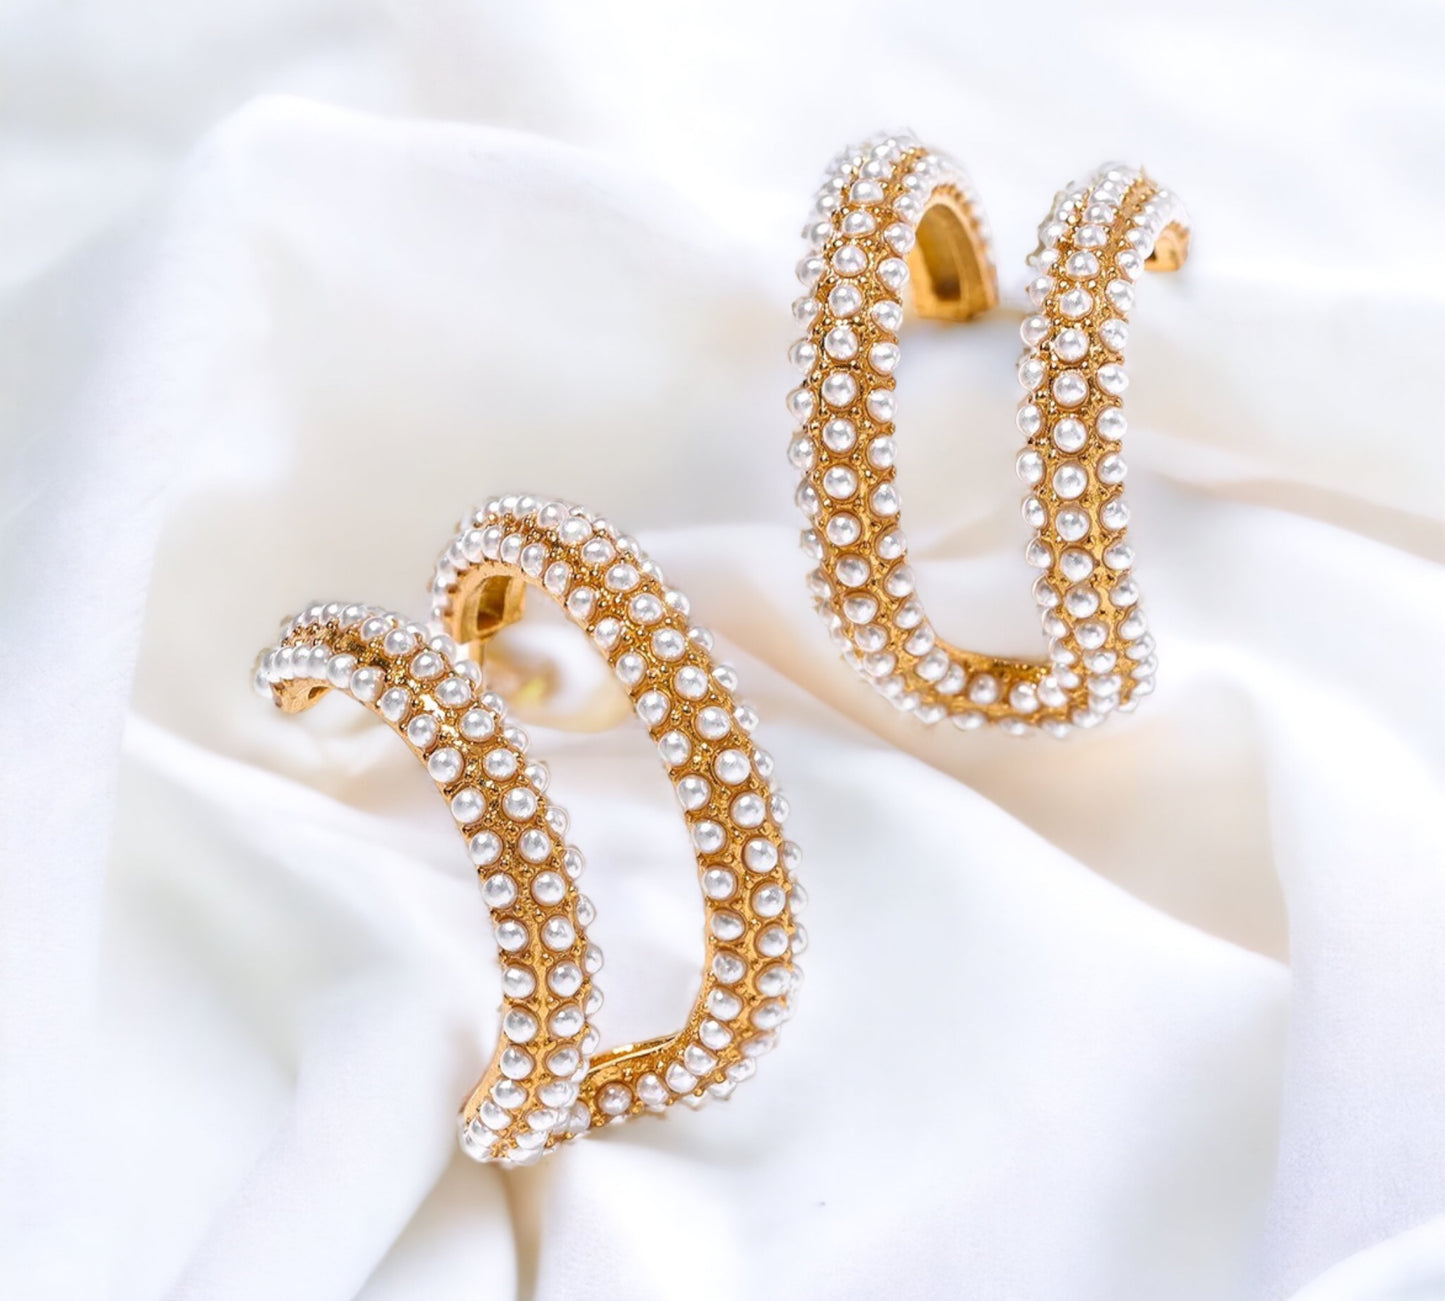 "INCA" gold plated half hoop earrings with double hoop illusion and covered by mini pearl beads